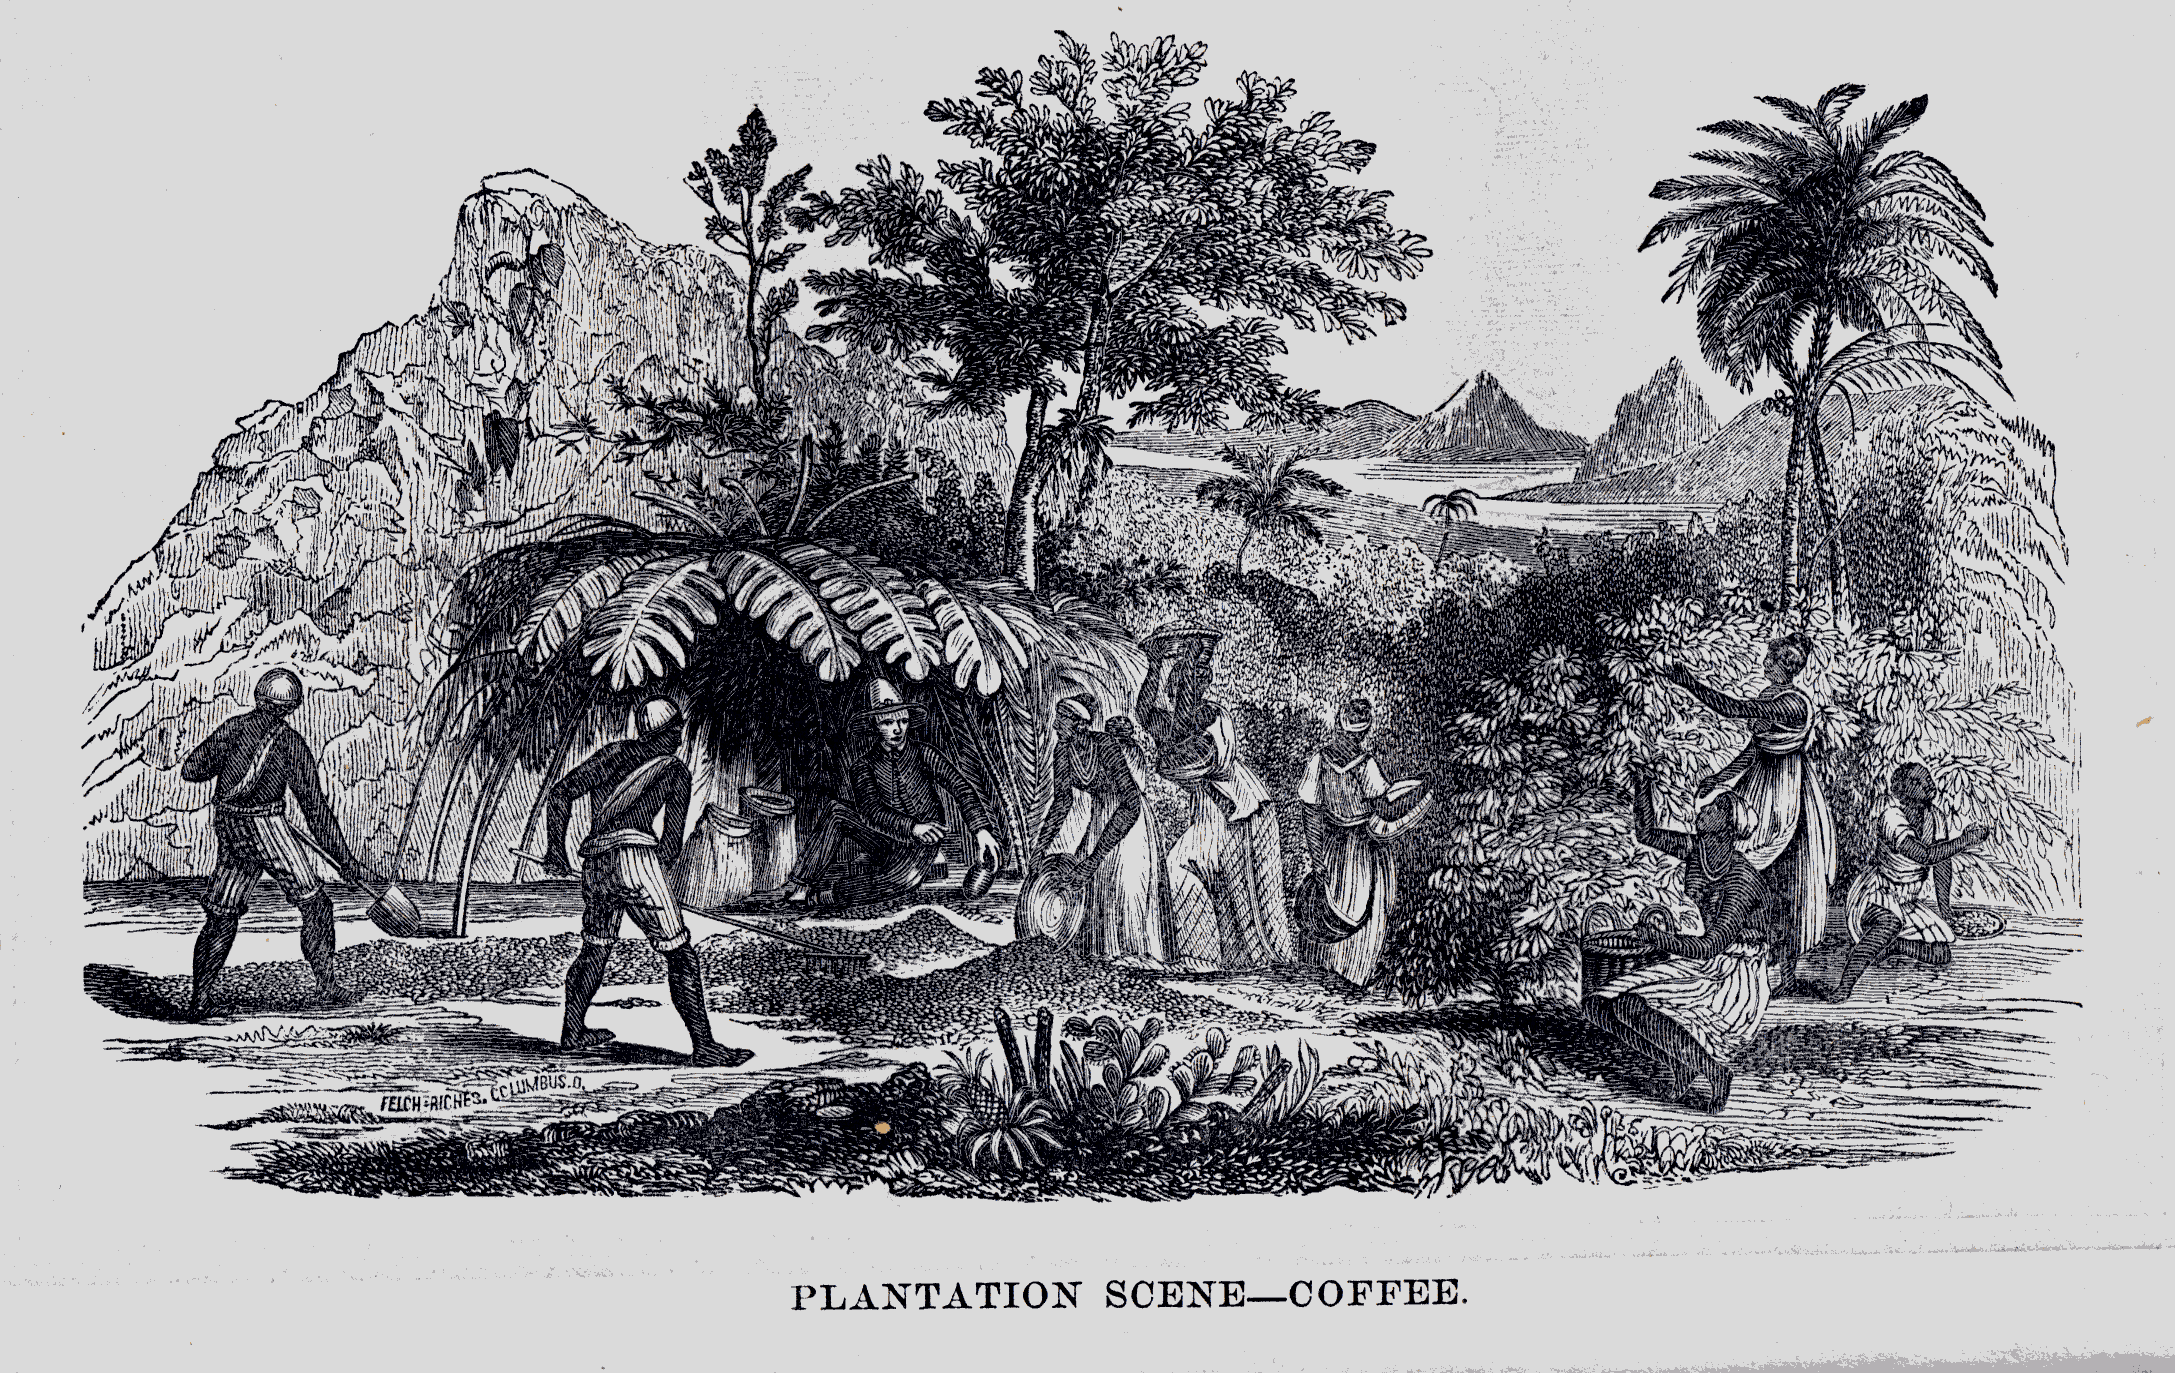 men and women gathering and drying coffee beans